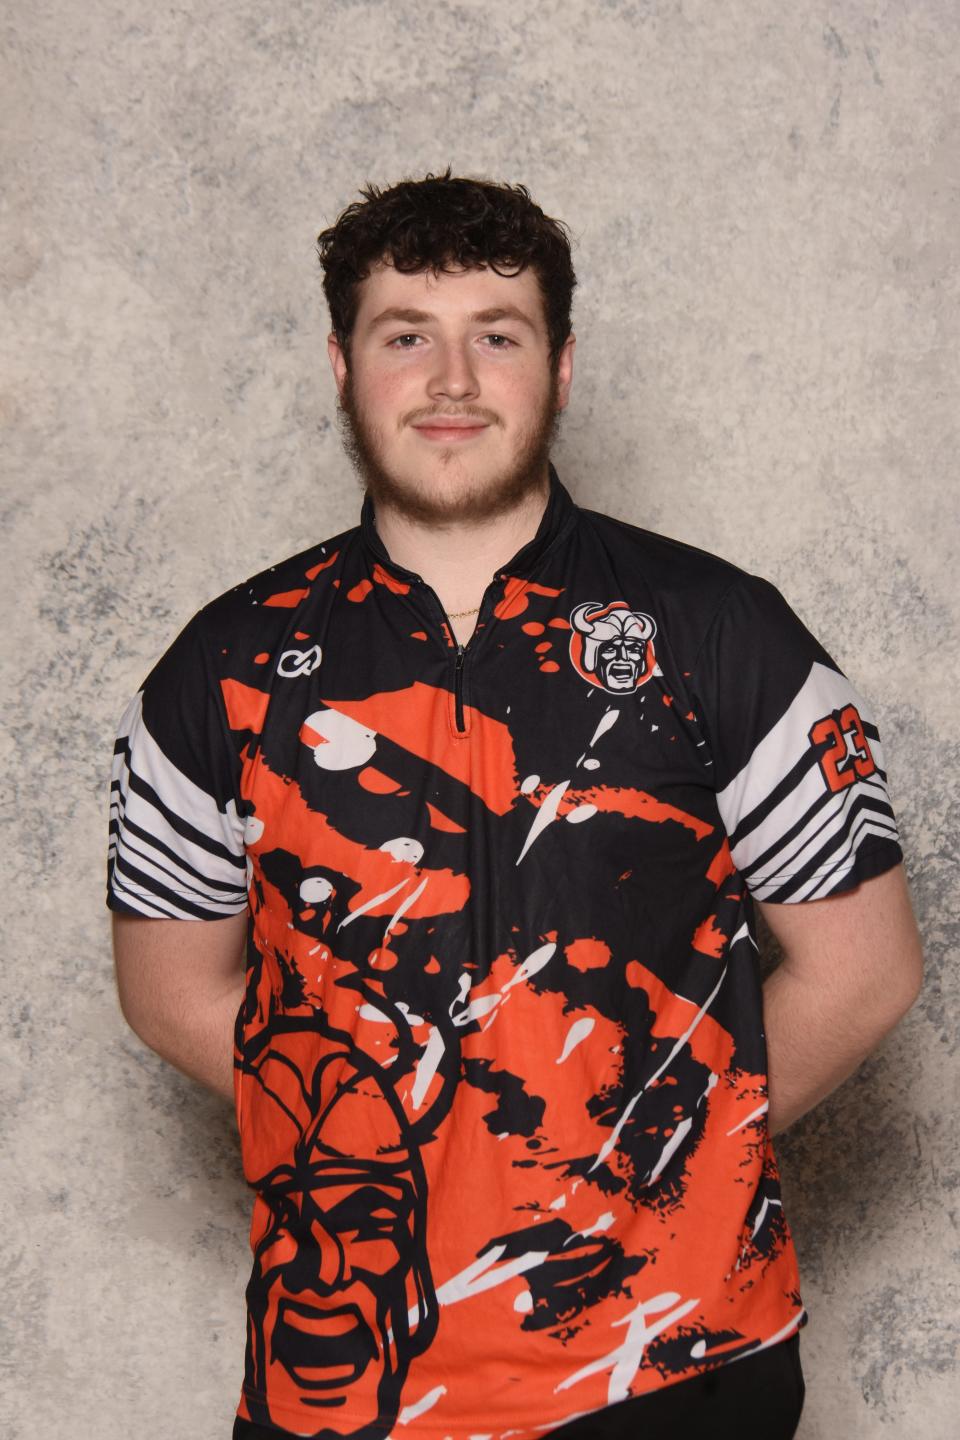 Connor Lab, Hoover High School bowling